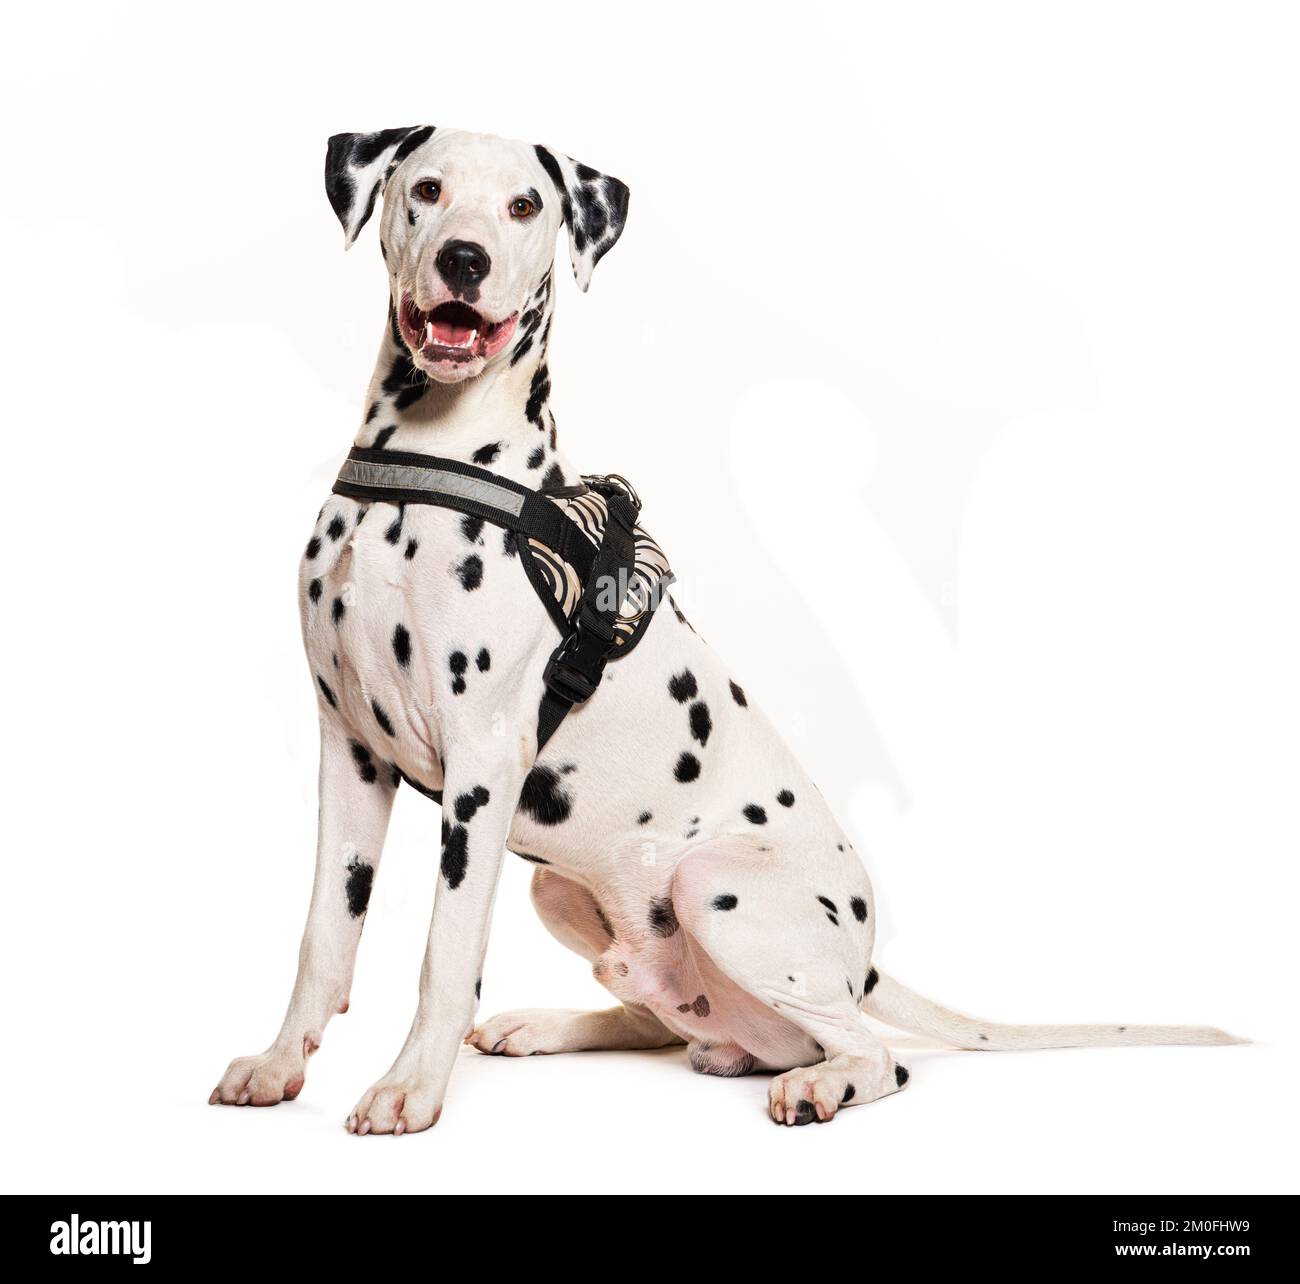 Dalmatian dog with harness, isolated on white Stock Photo